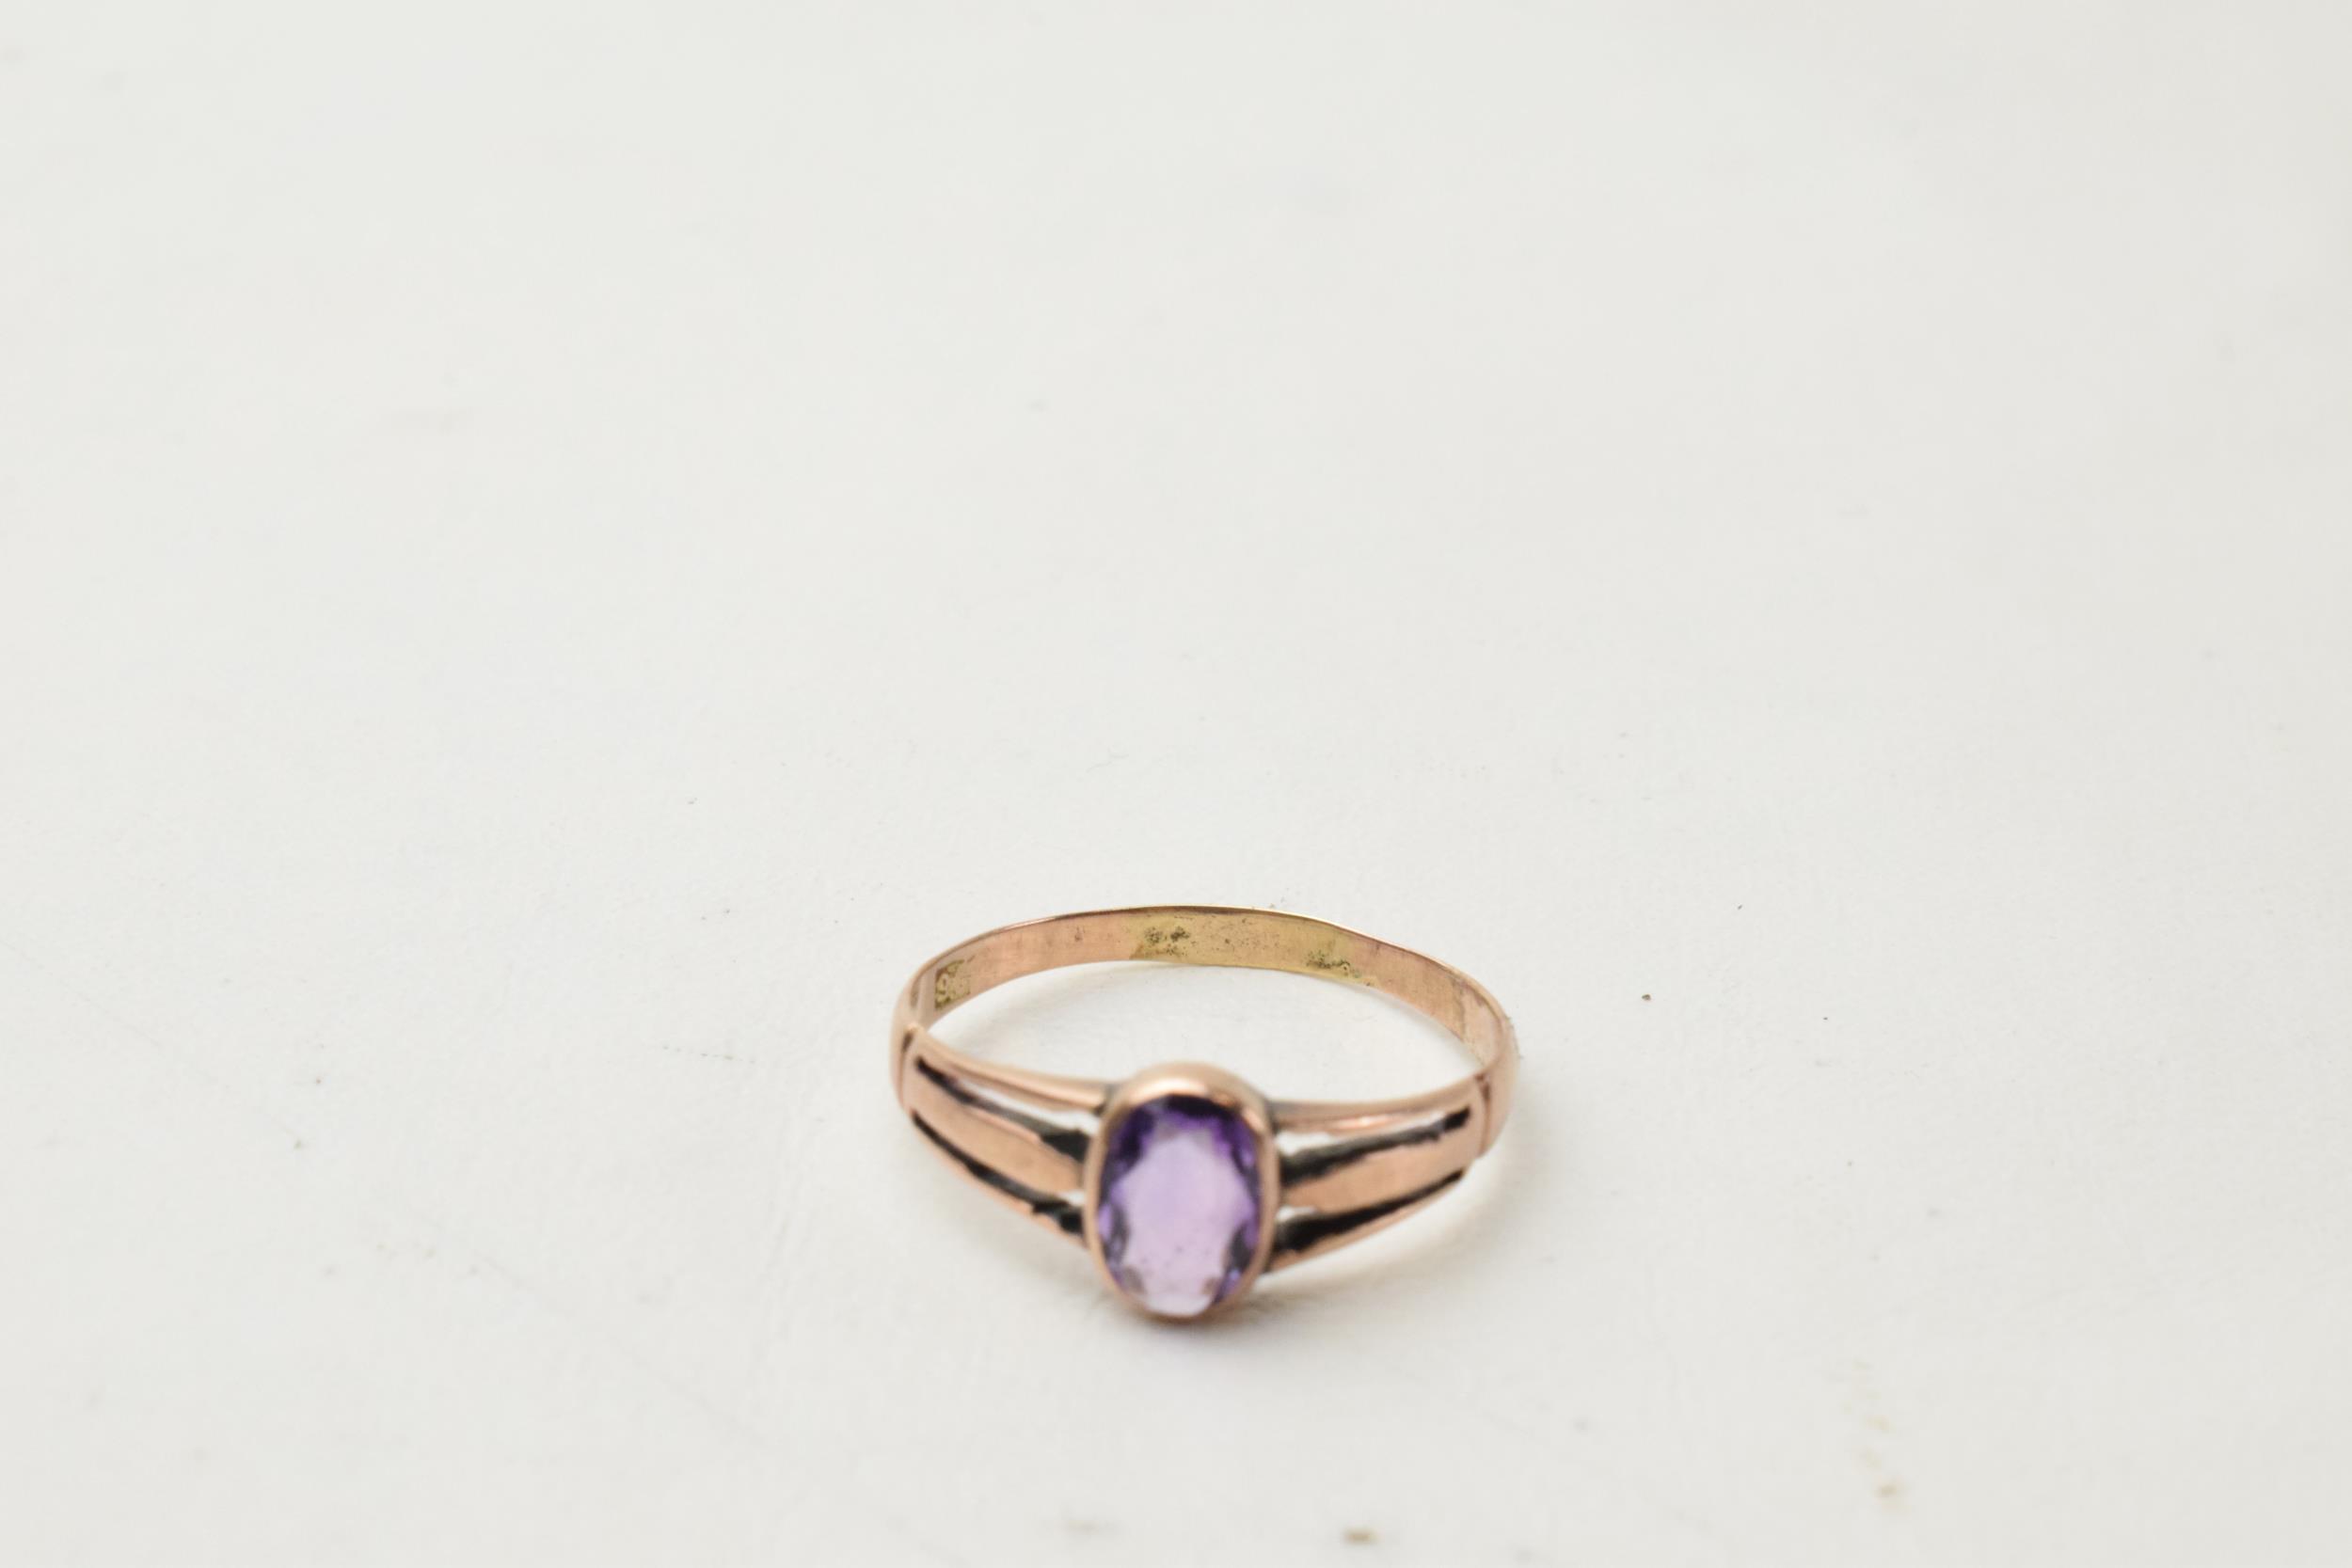 Antique 9ct gold ladies ring set with an amethyst, 1.7 grams, size S. Antique repair to shank. - Image 2 of 2